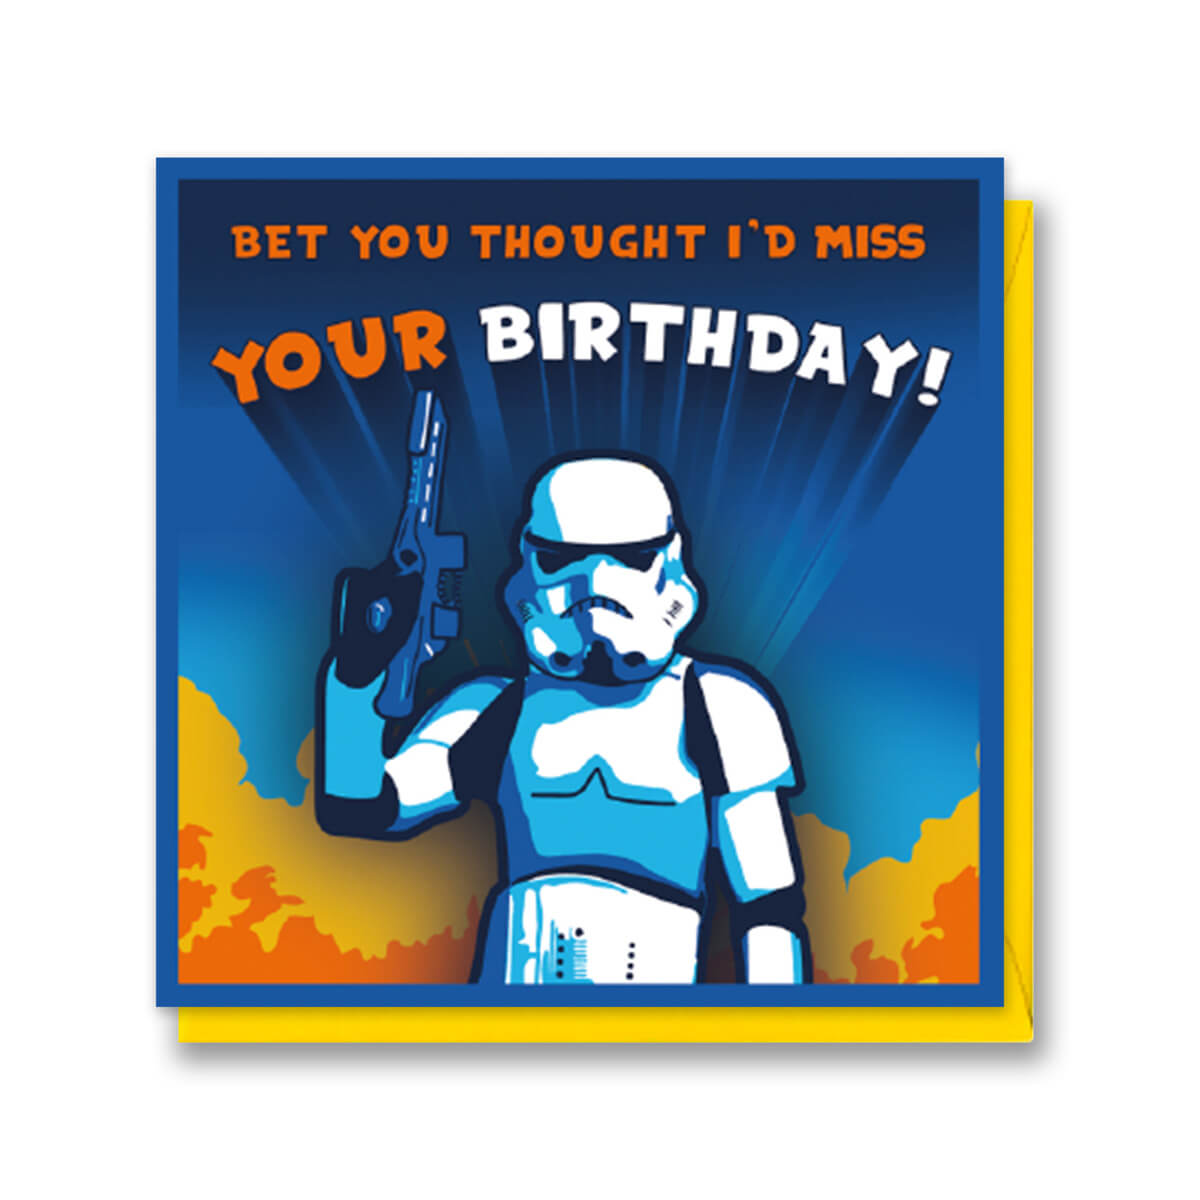 Original Stormtrooper Birthday Card - Card reads 'Bet you thought i'd miss your birthday'